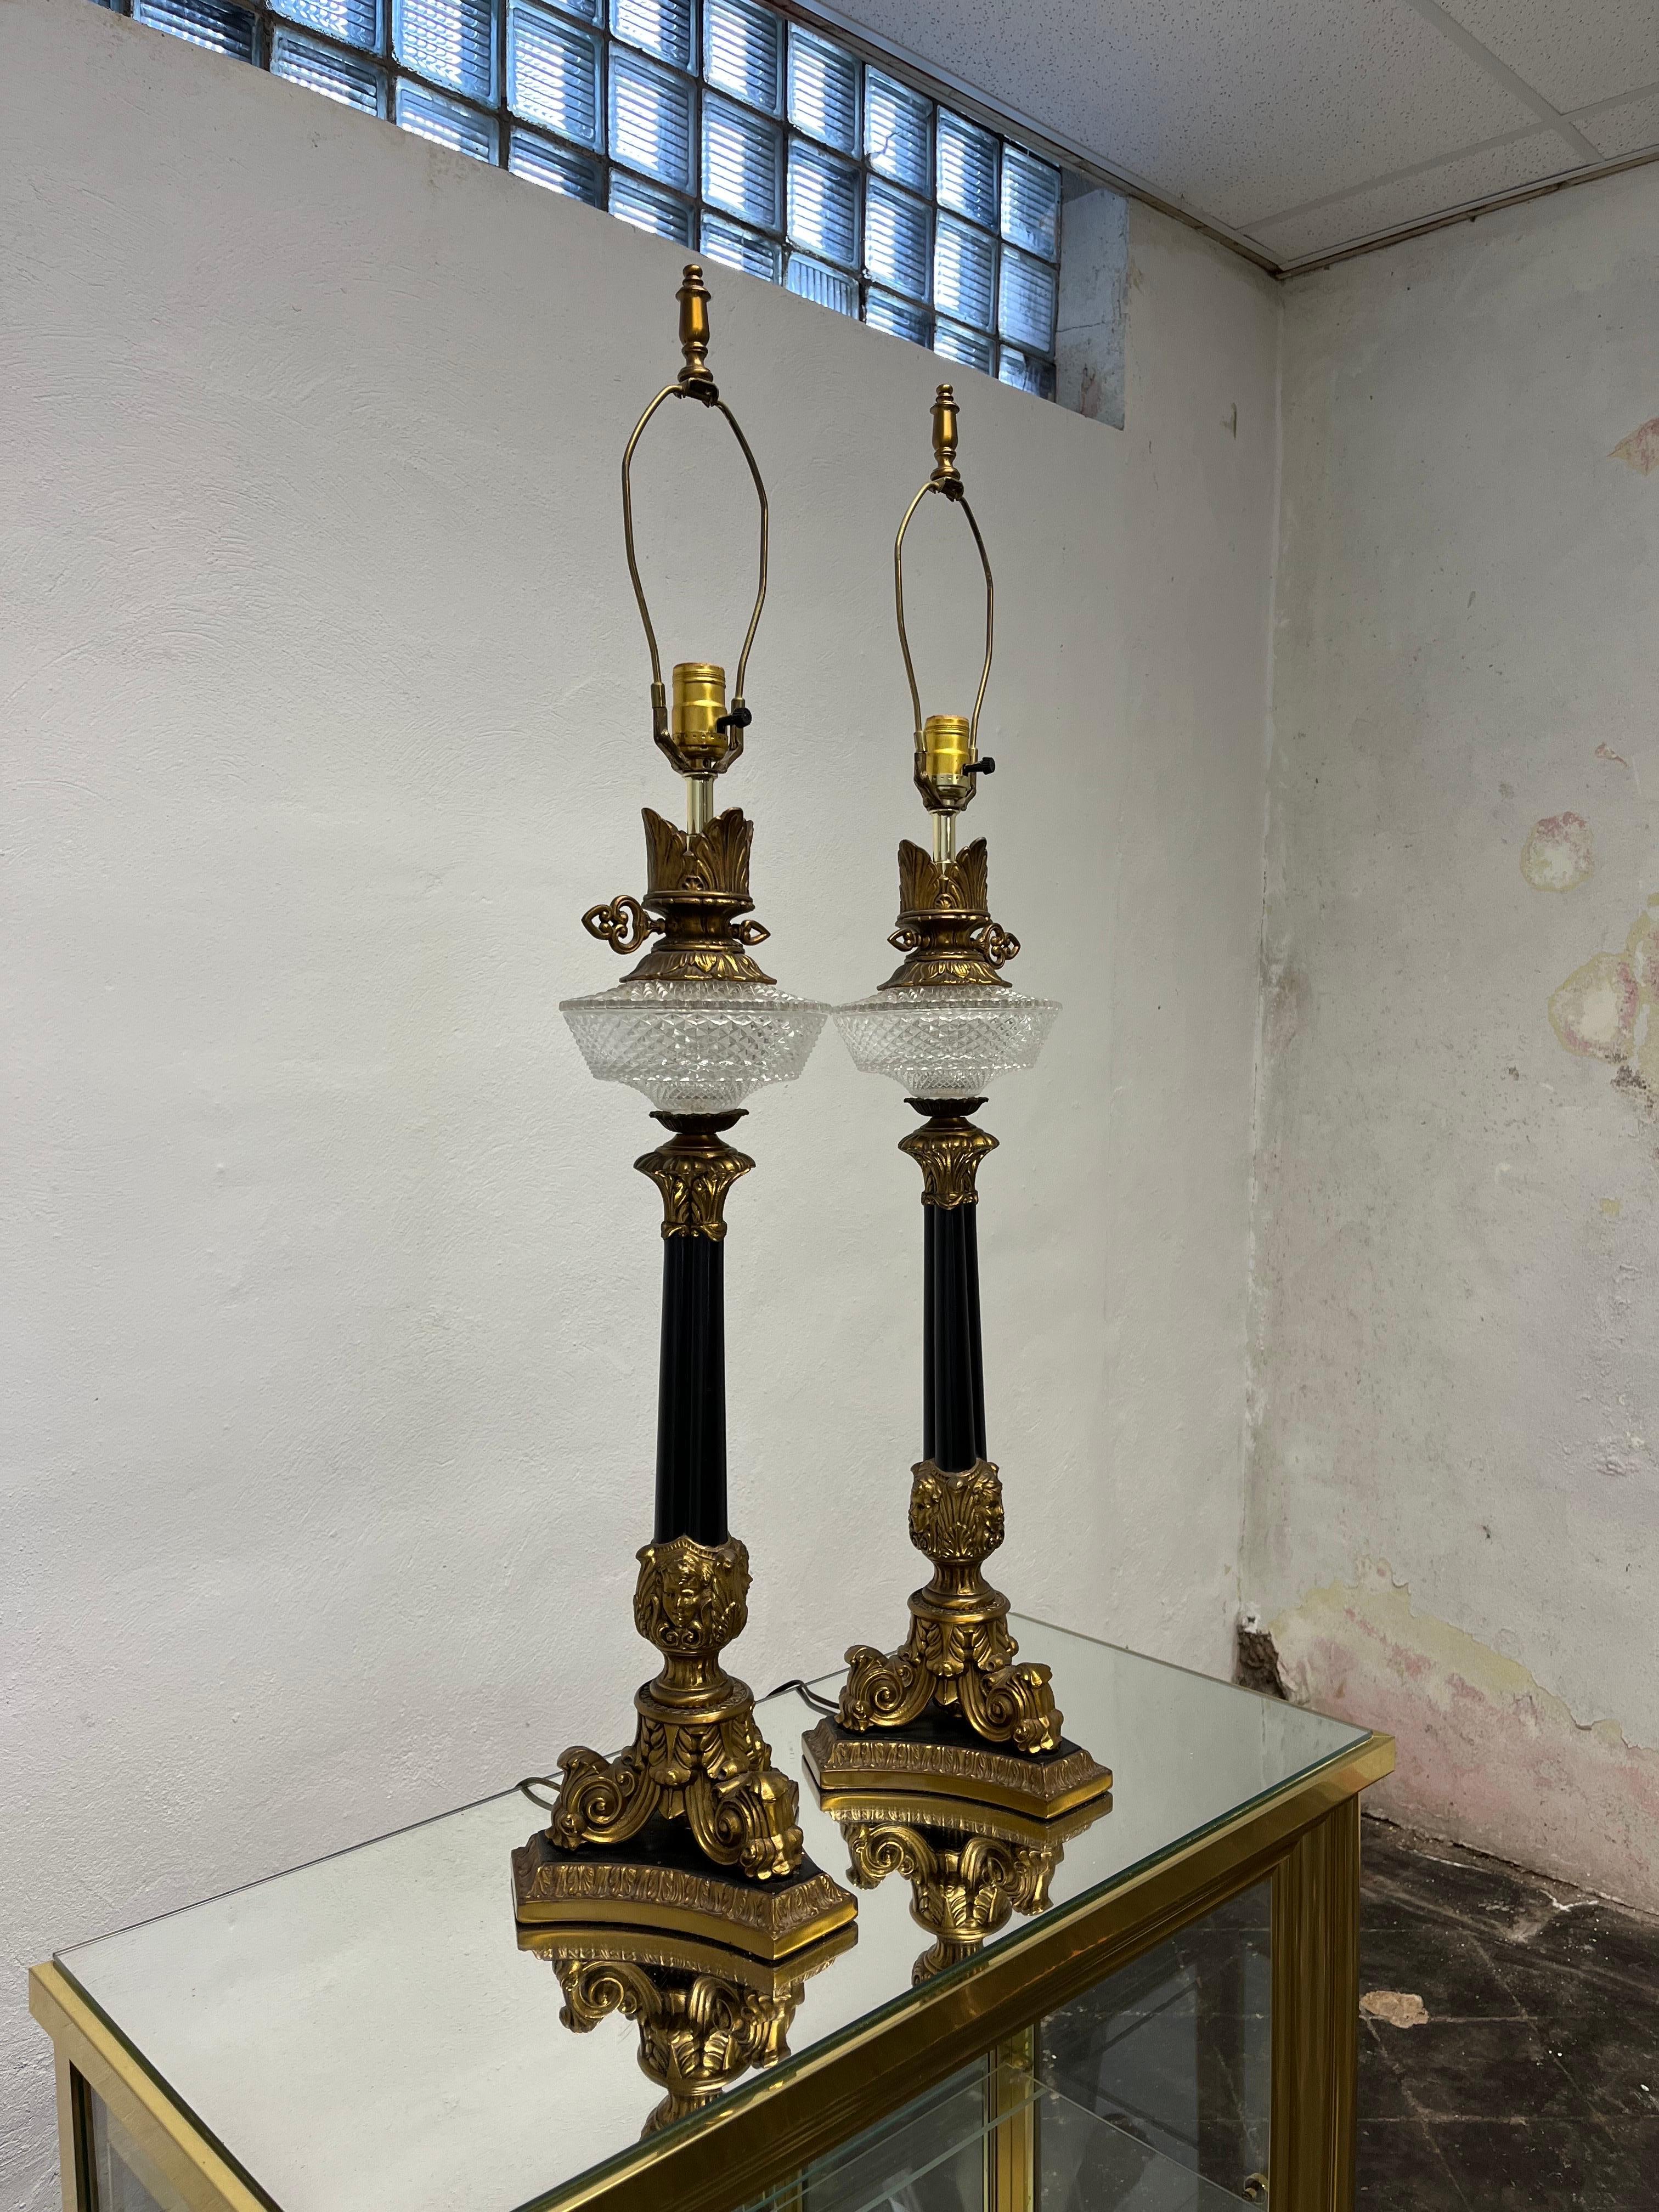 Beautiful Empire style lamps. Cut glass or pressed glass oil reservoirs with flame tops and key detail. 3 portraits adorn the top of the highly ornate bases. Heavy.
Curbside to NYC/Philly $300